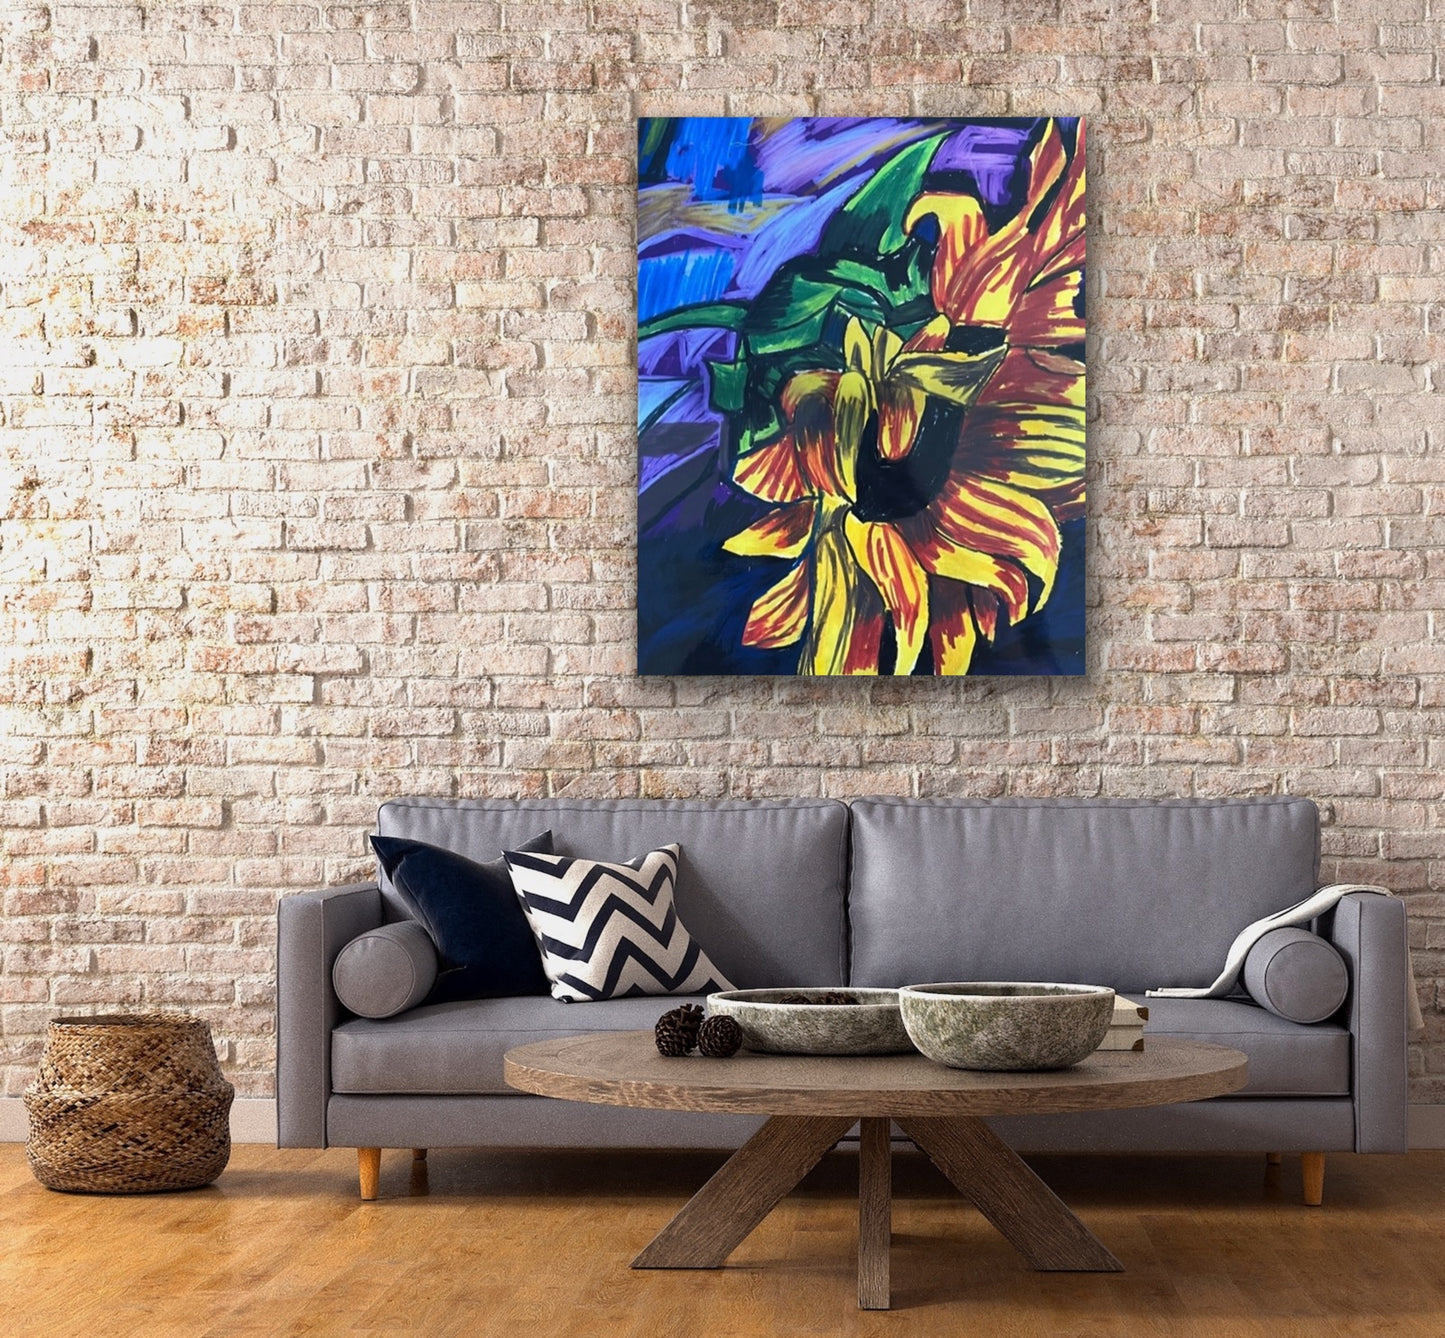 Shy Sunflower - Stretched Canvas Print in more sizes